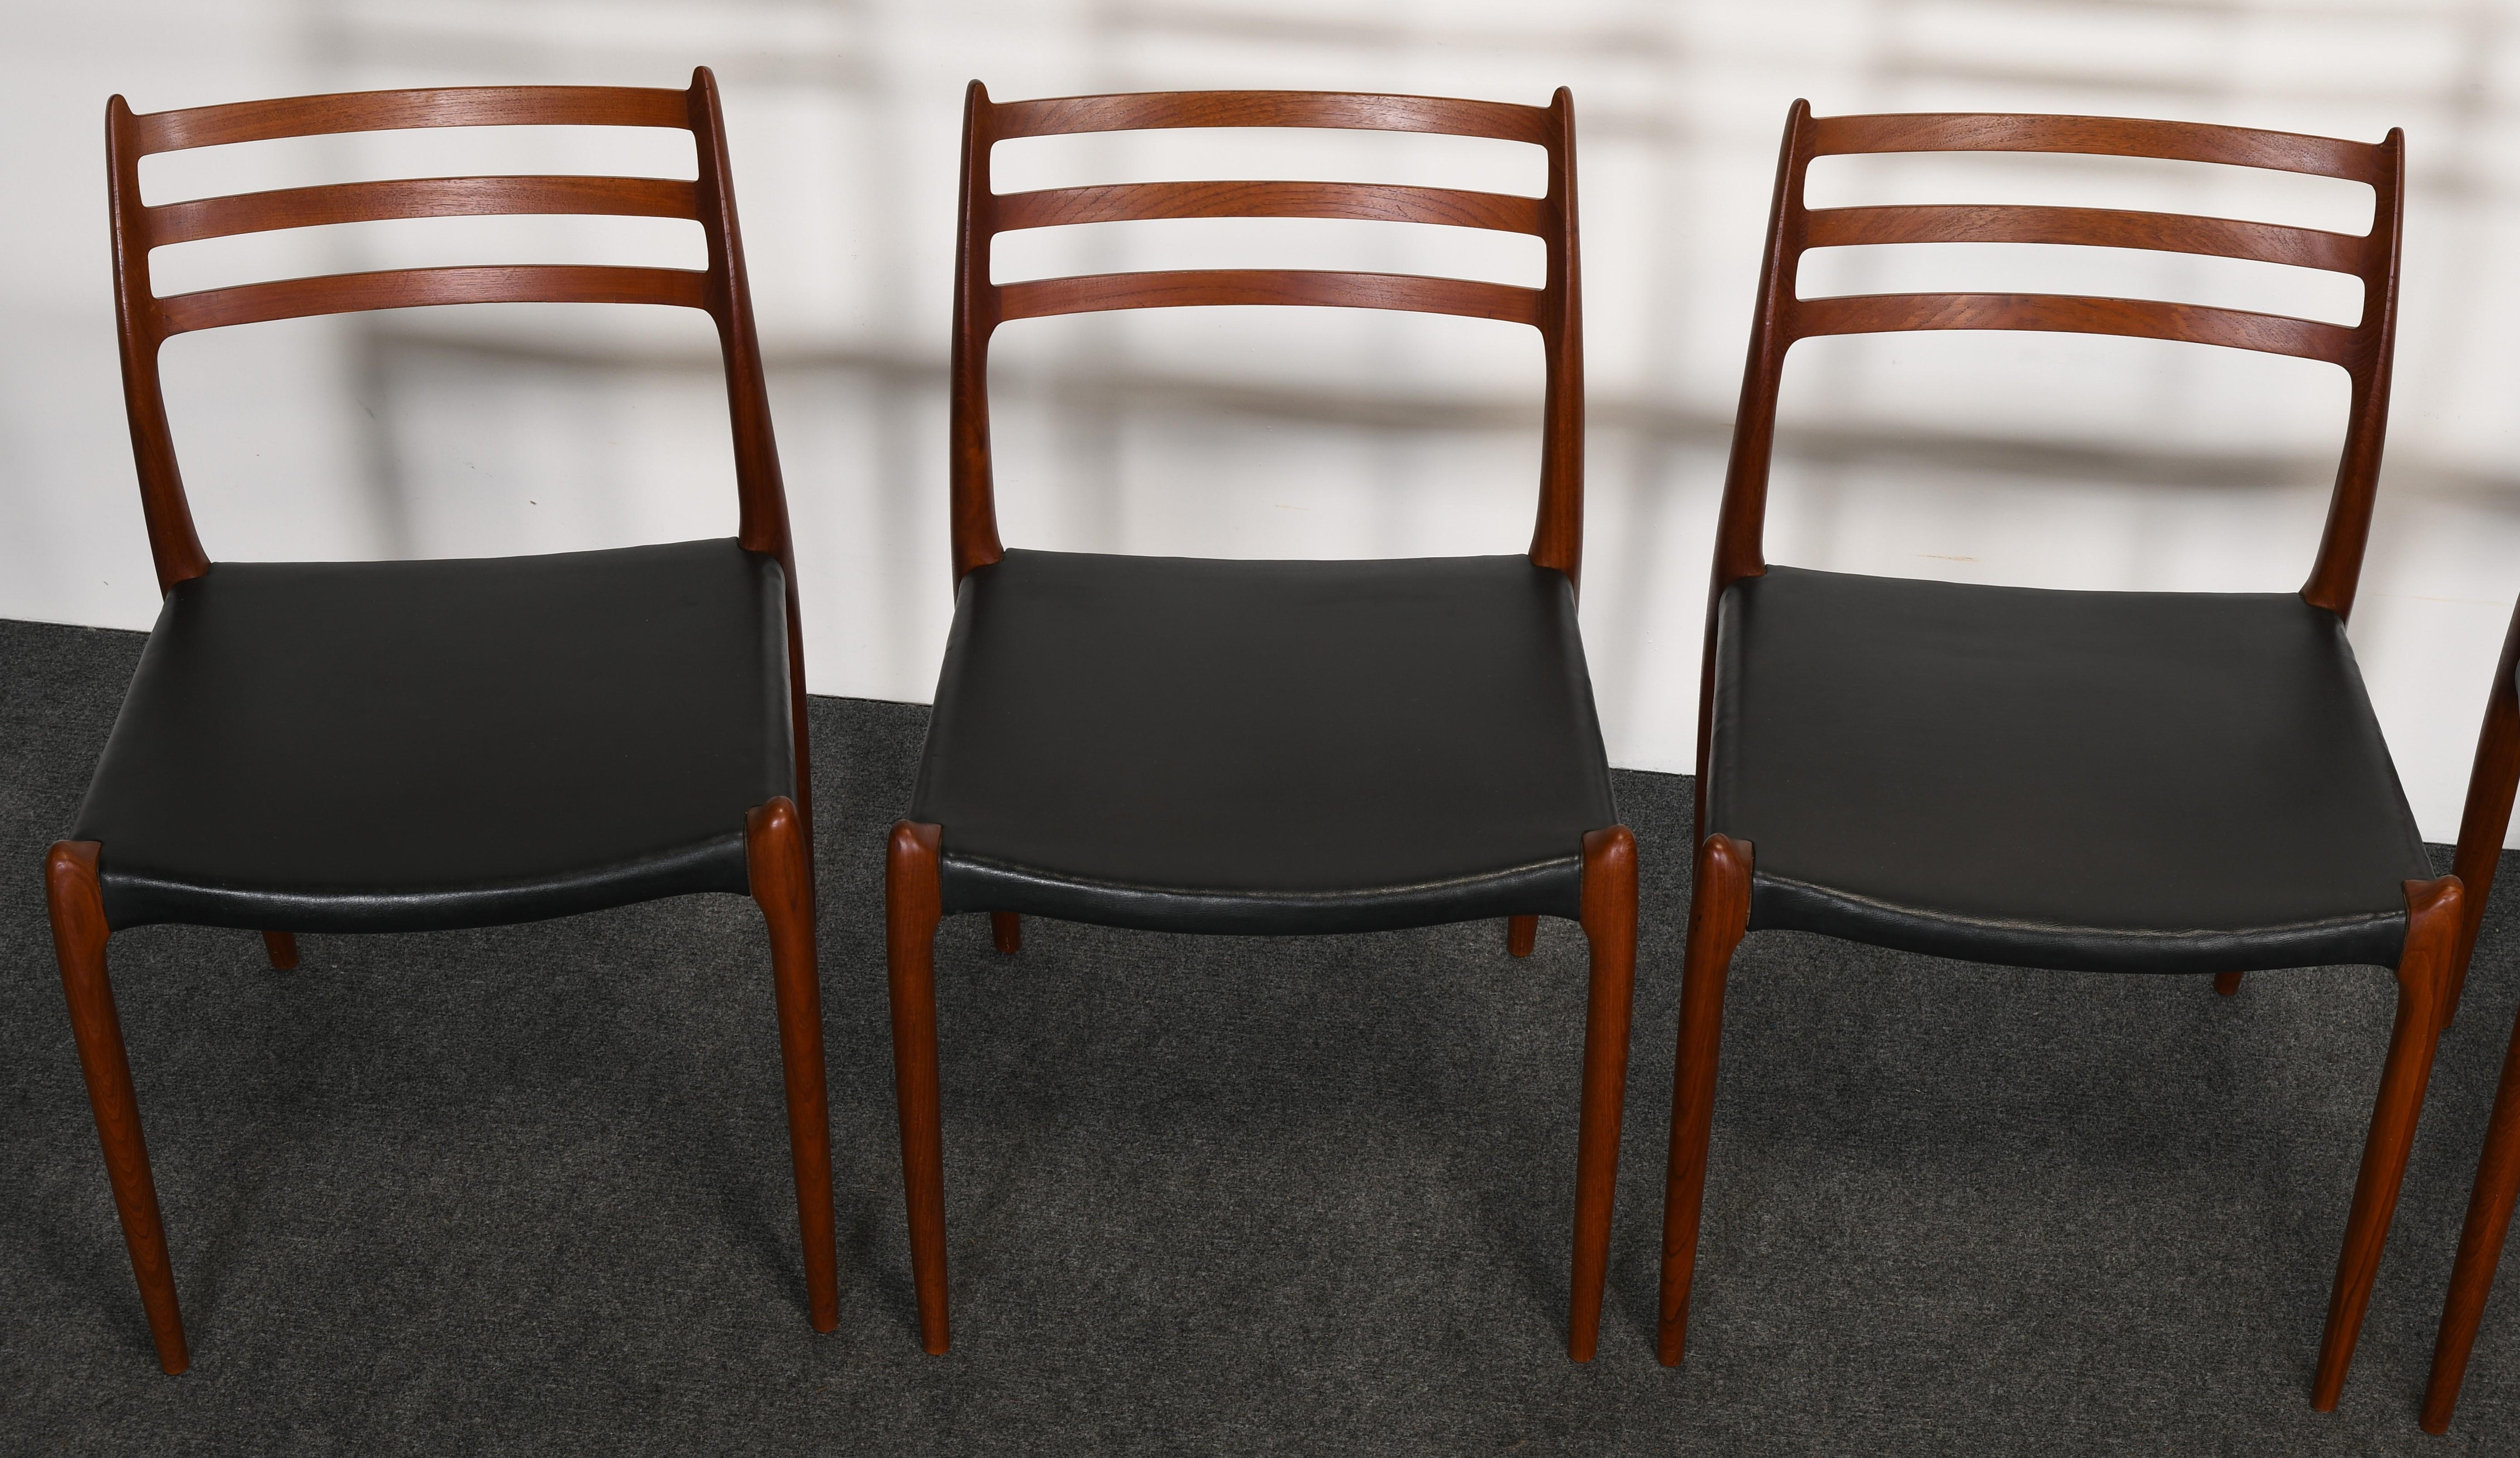 Mid-20th Century Niels Moller Model 78 Teak Dining Chairs for J L Mollers Mobelfabrik, 1960s